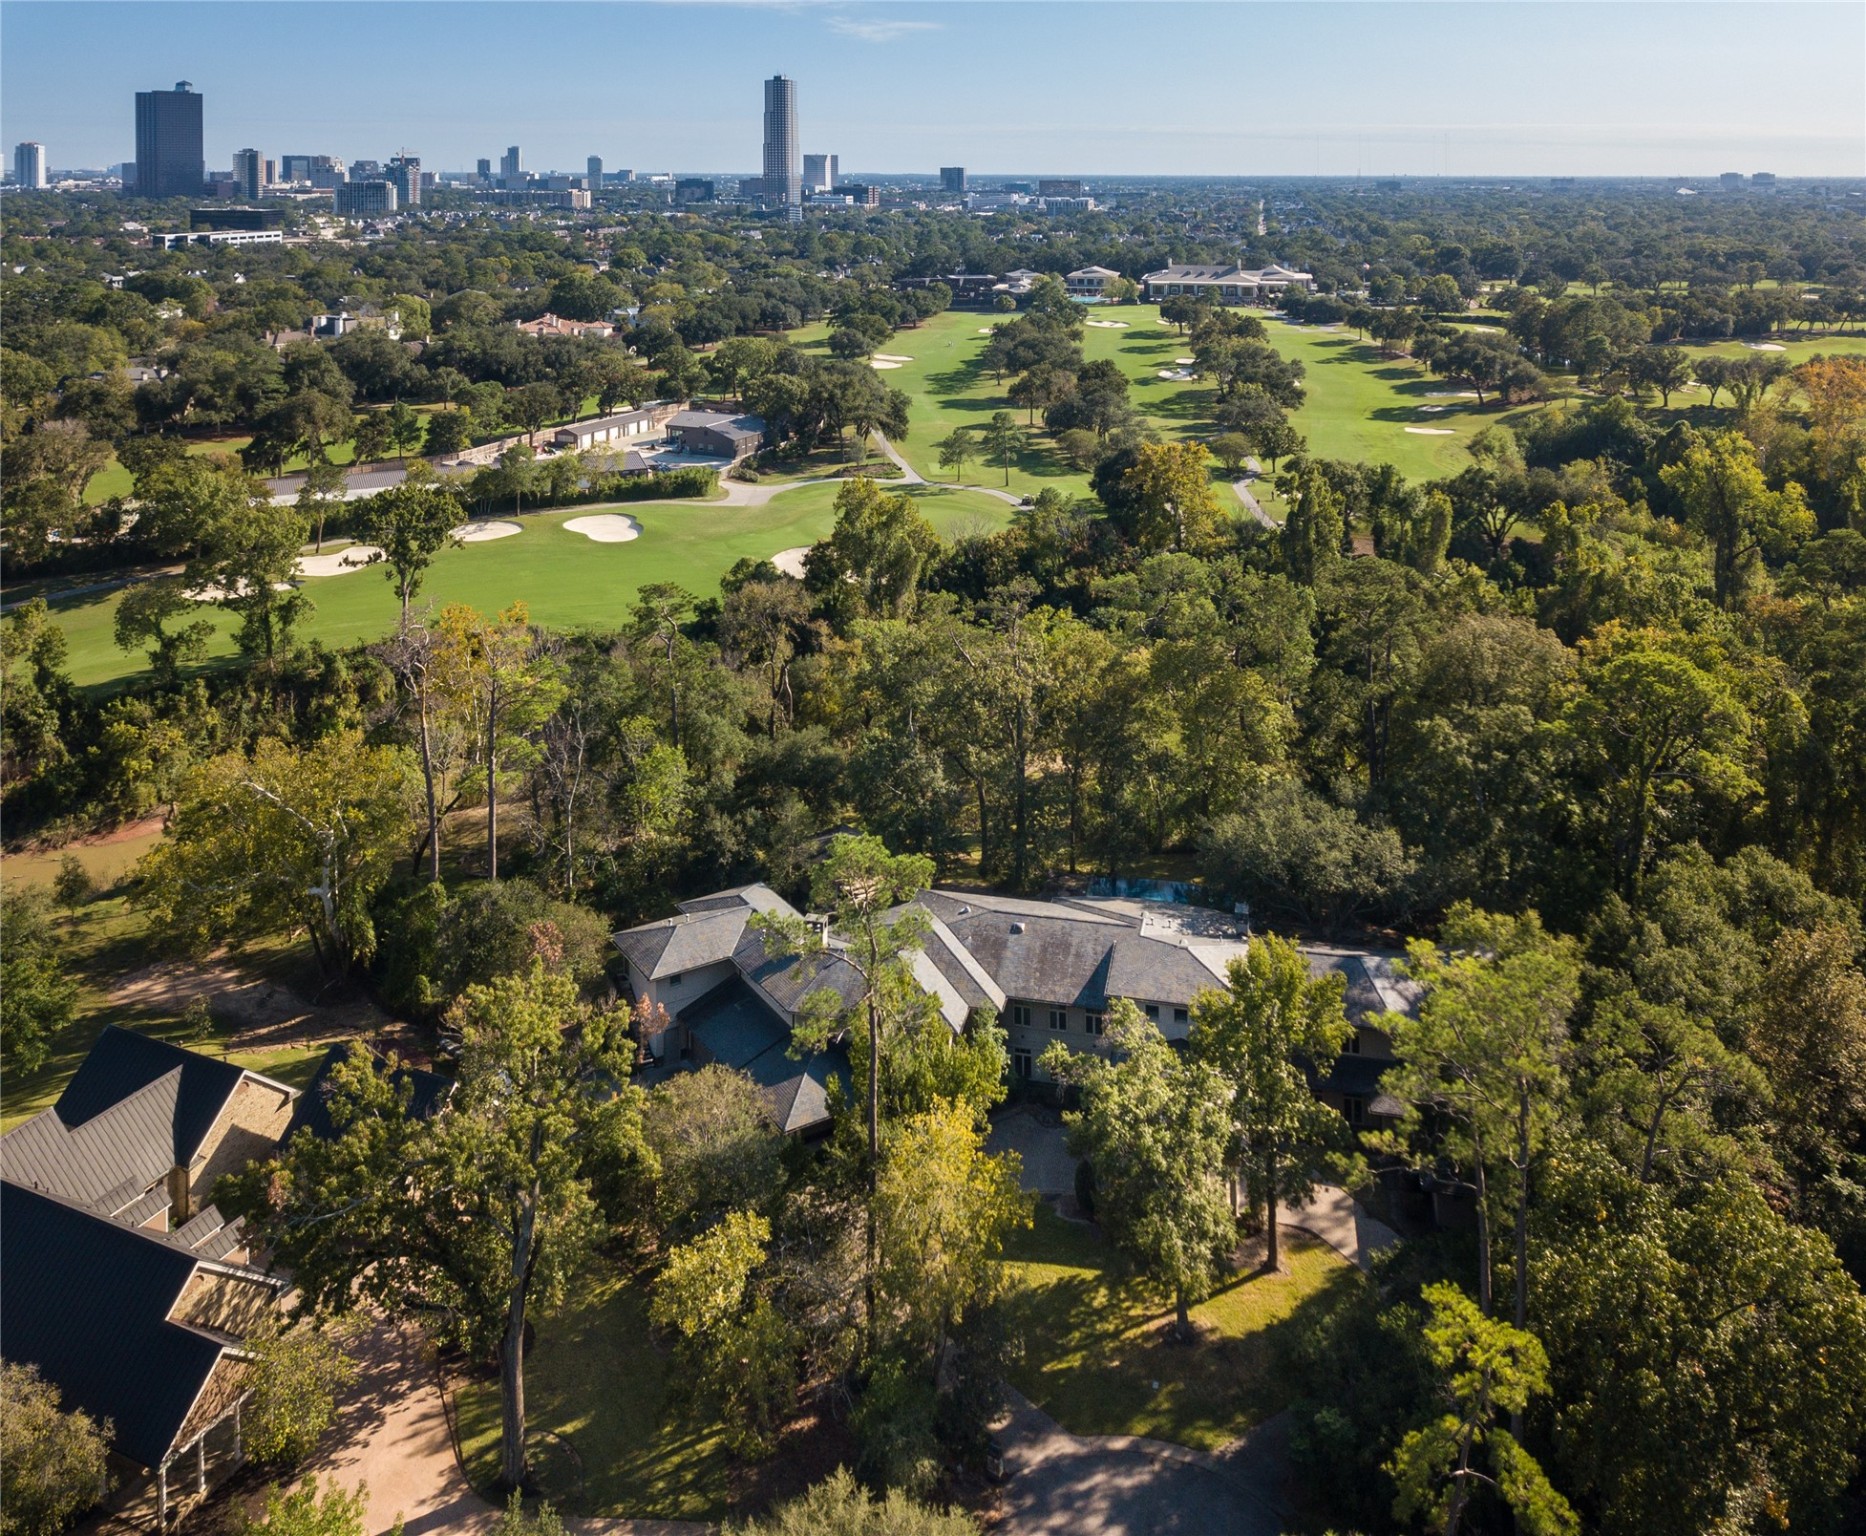 The 17th Hole of Houston Country Club's golf course is directly across the bayou.